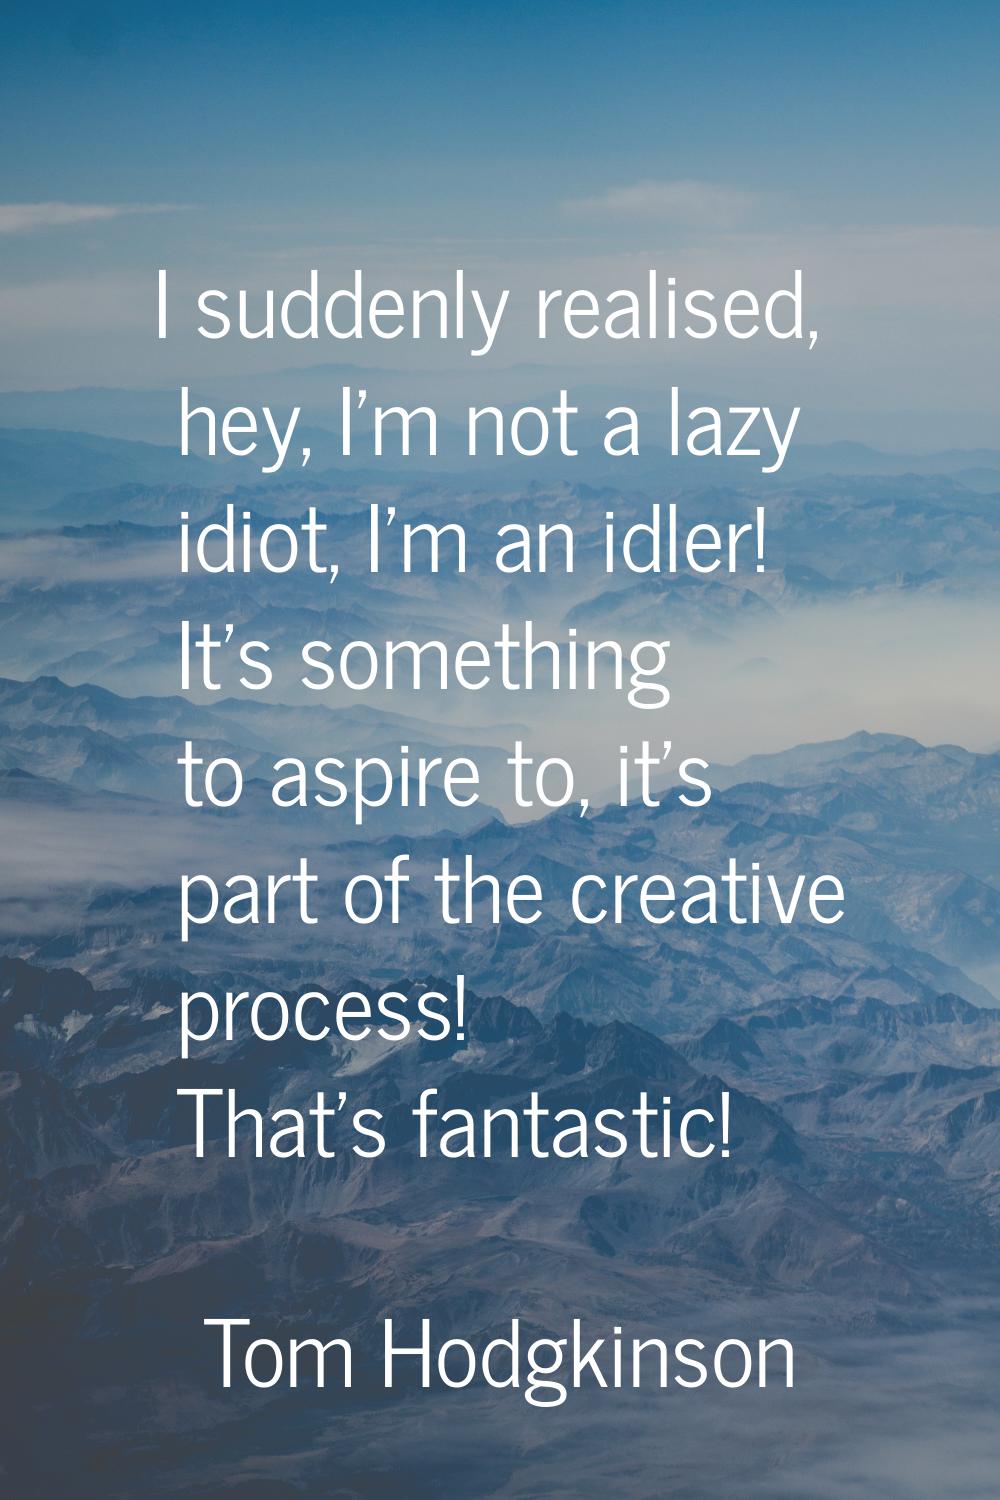 I suddenly realised, hey, I'm not a lazy idiot, I'm an idler! It's something to aspire to, it's par